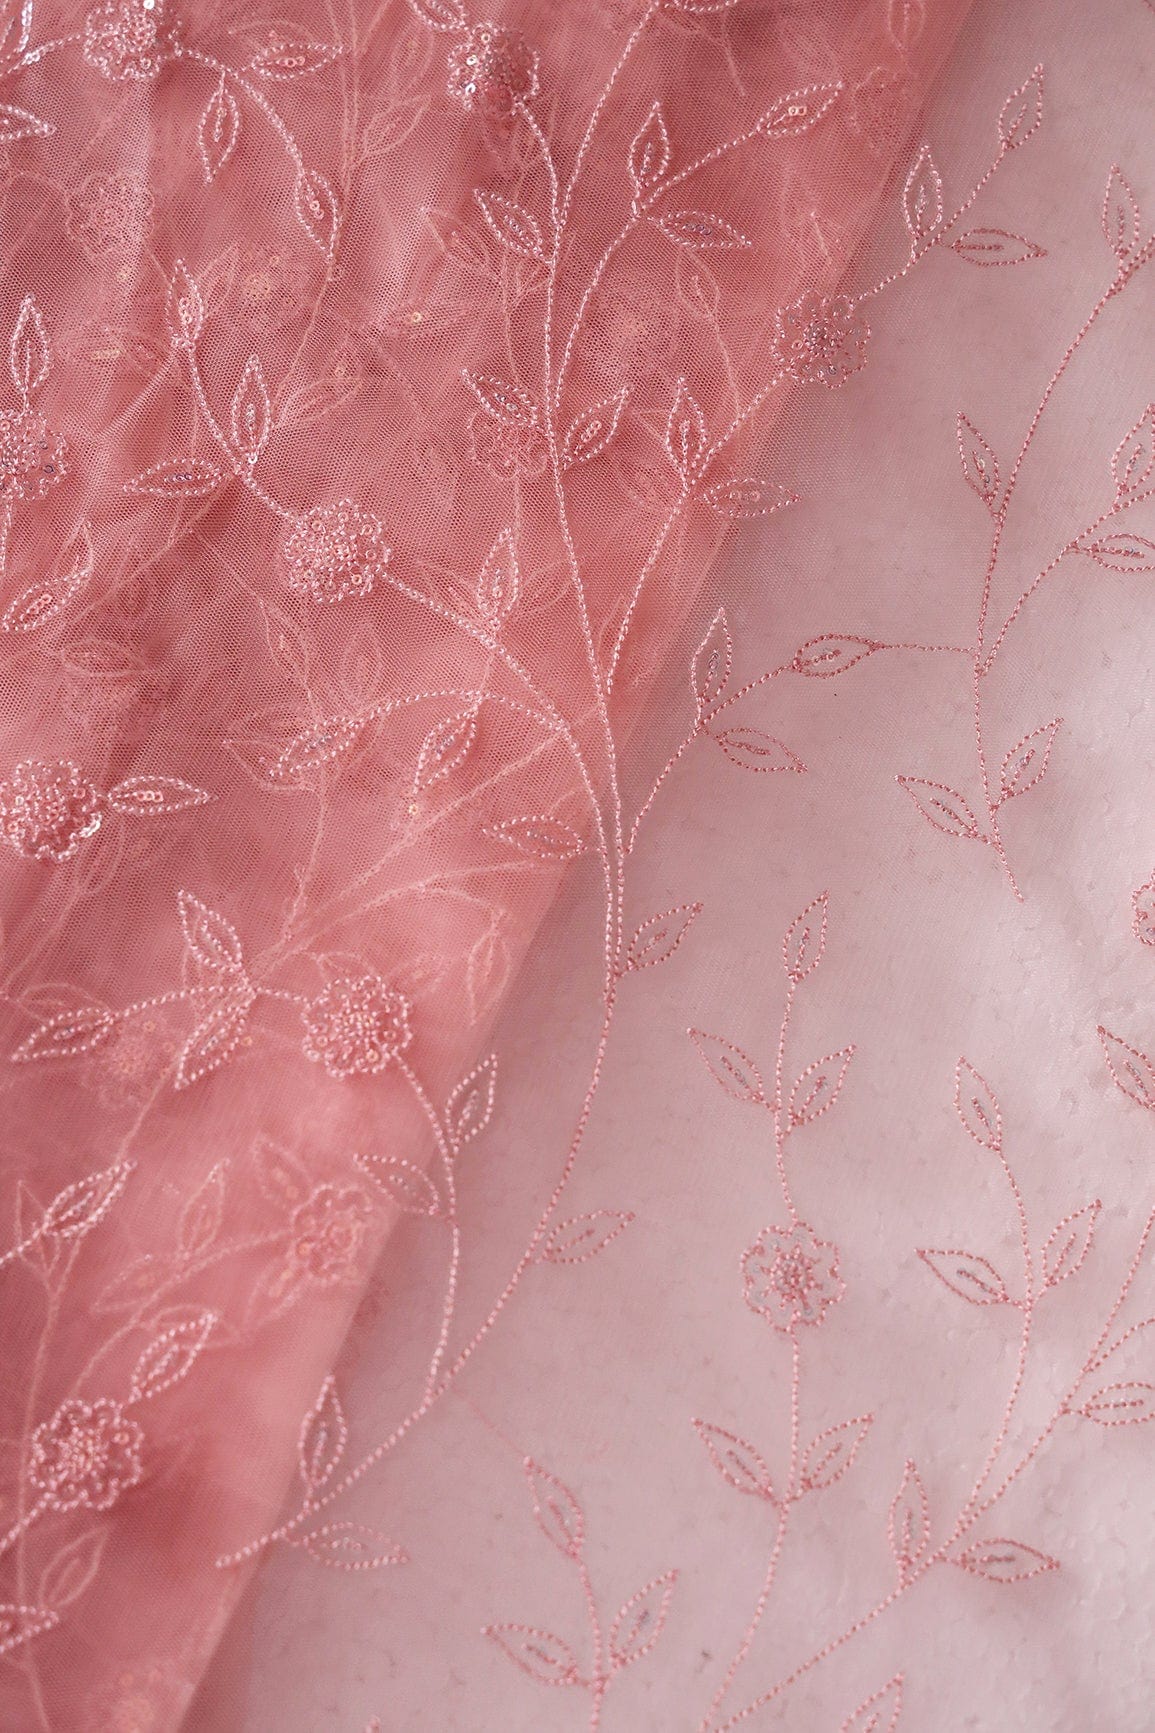 doeraa Embroidery Fabrics Pink Thread With Sequins Beautiful Leafy Floral Embroidery On Pink Soft Net Fabric